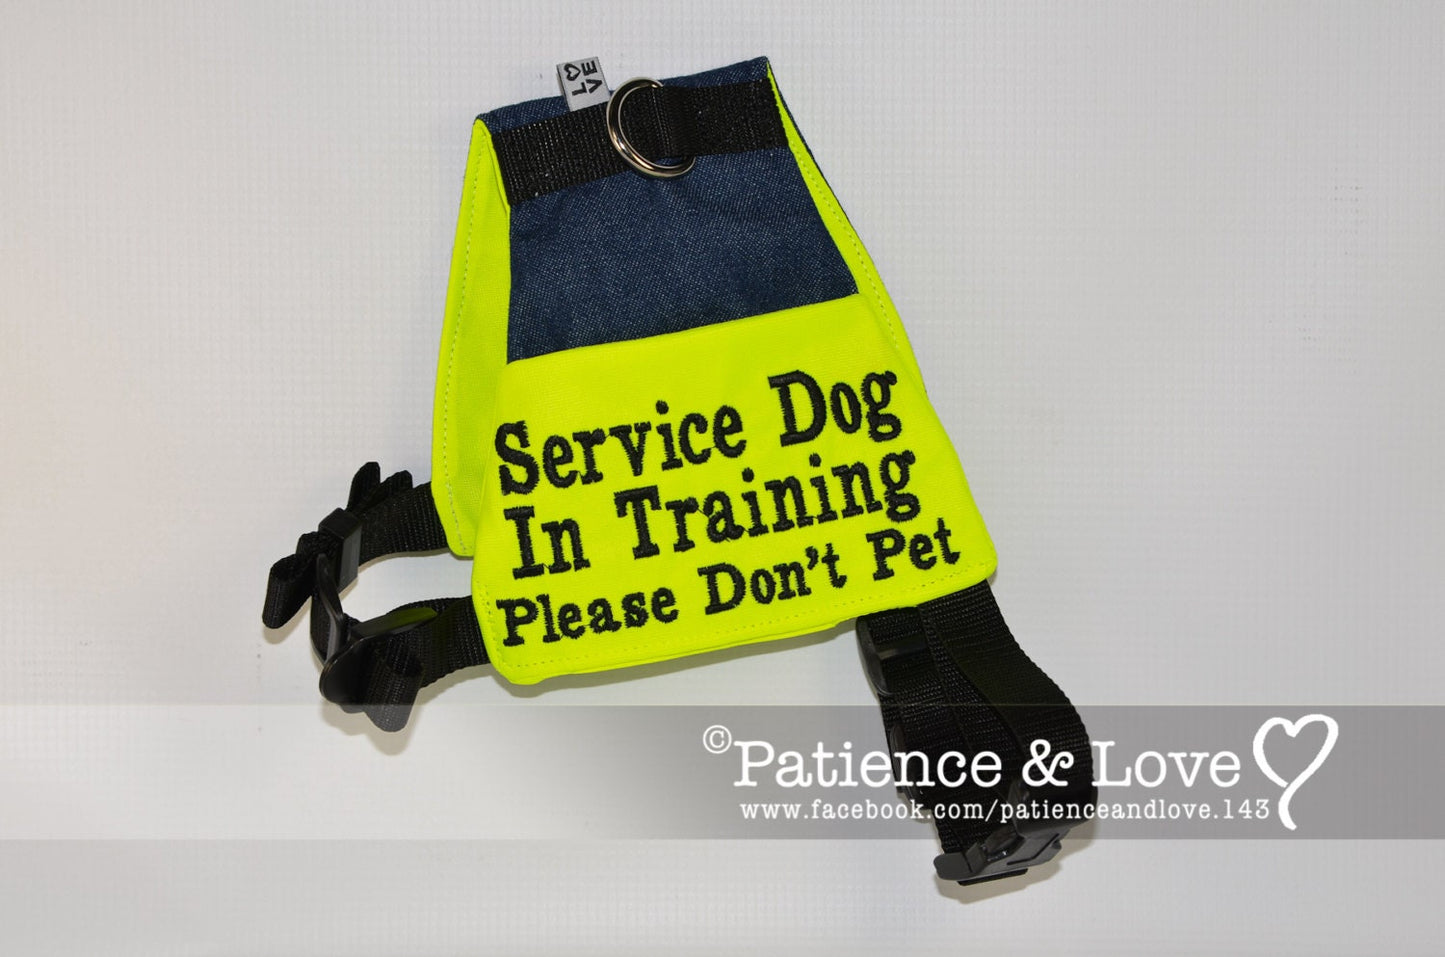 Service Dog In Training Please Don't Pet, Butterfly Style Embroidered Vest